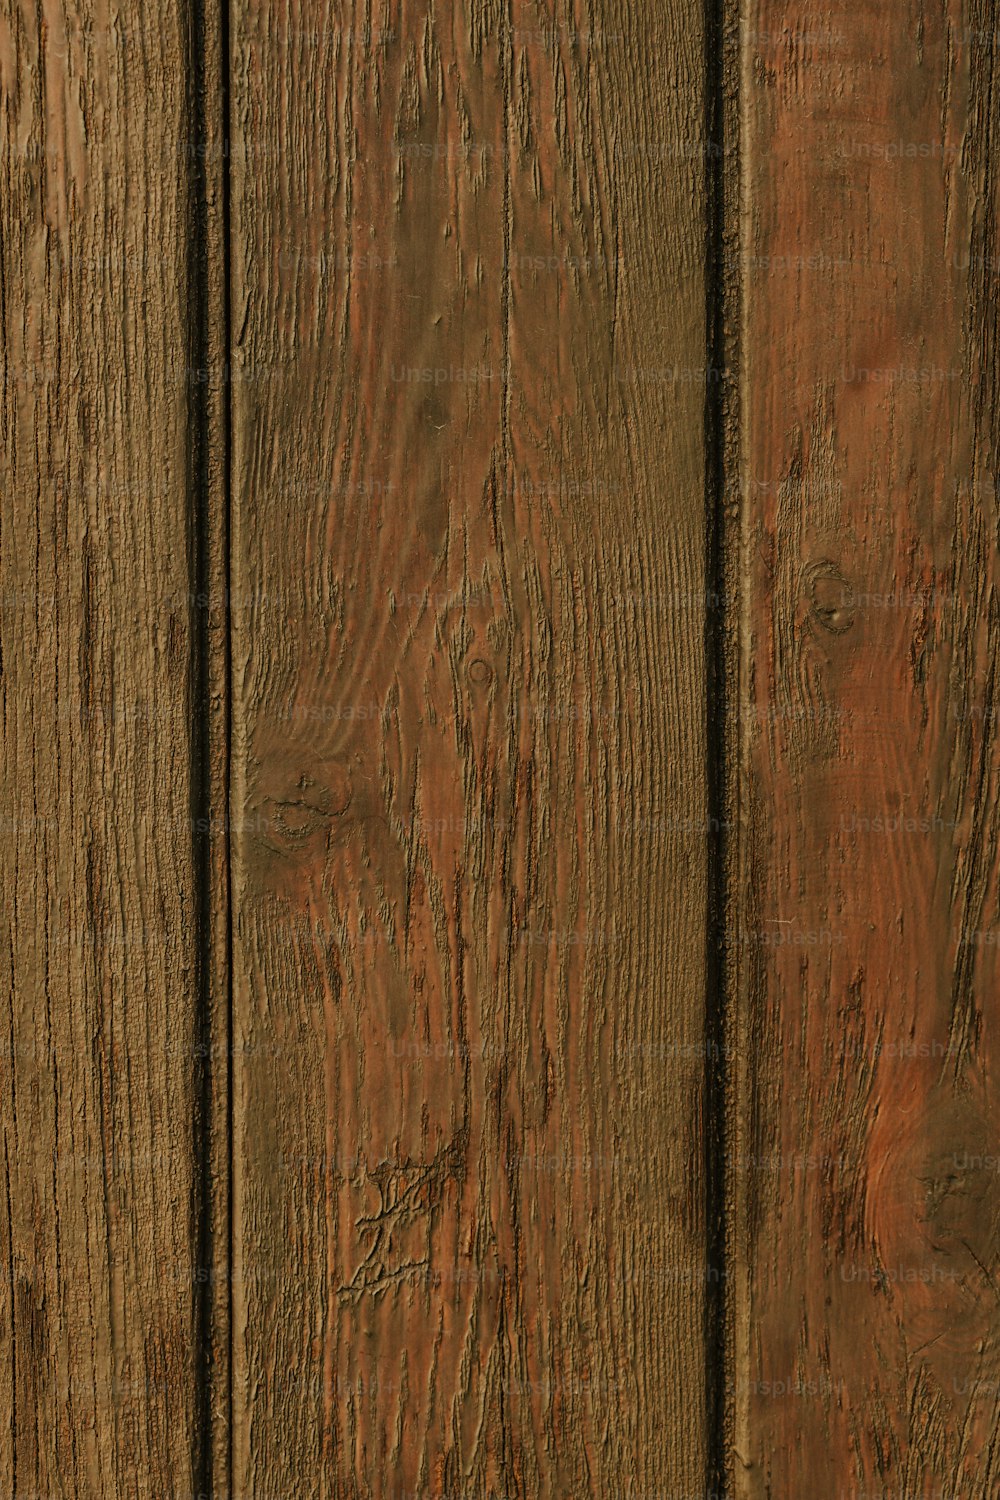 a close up of a cell phone on a wooden surface